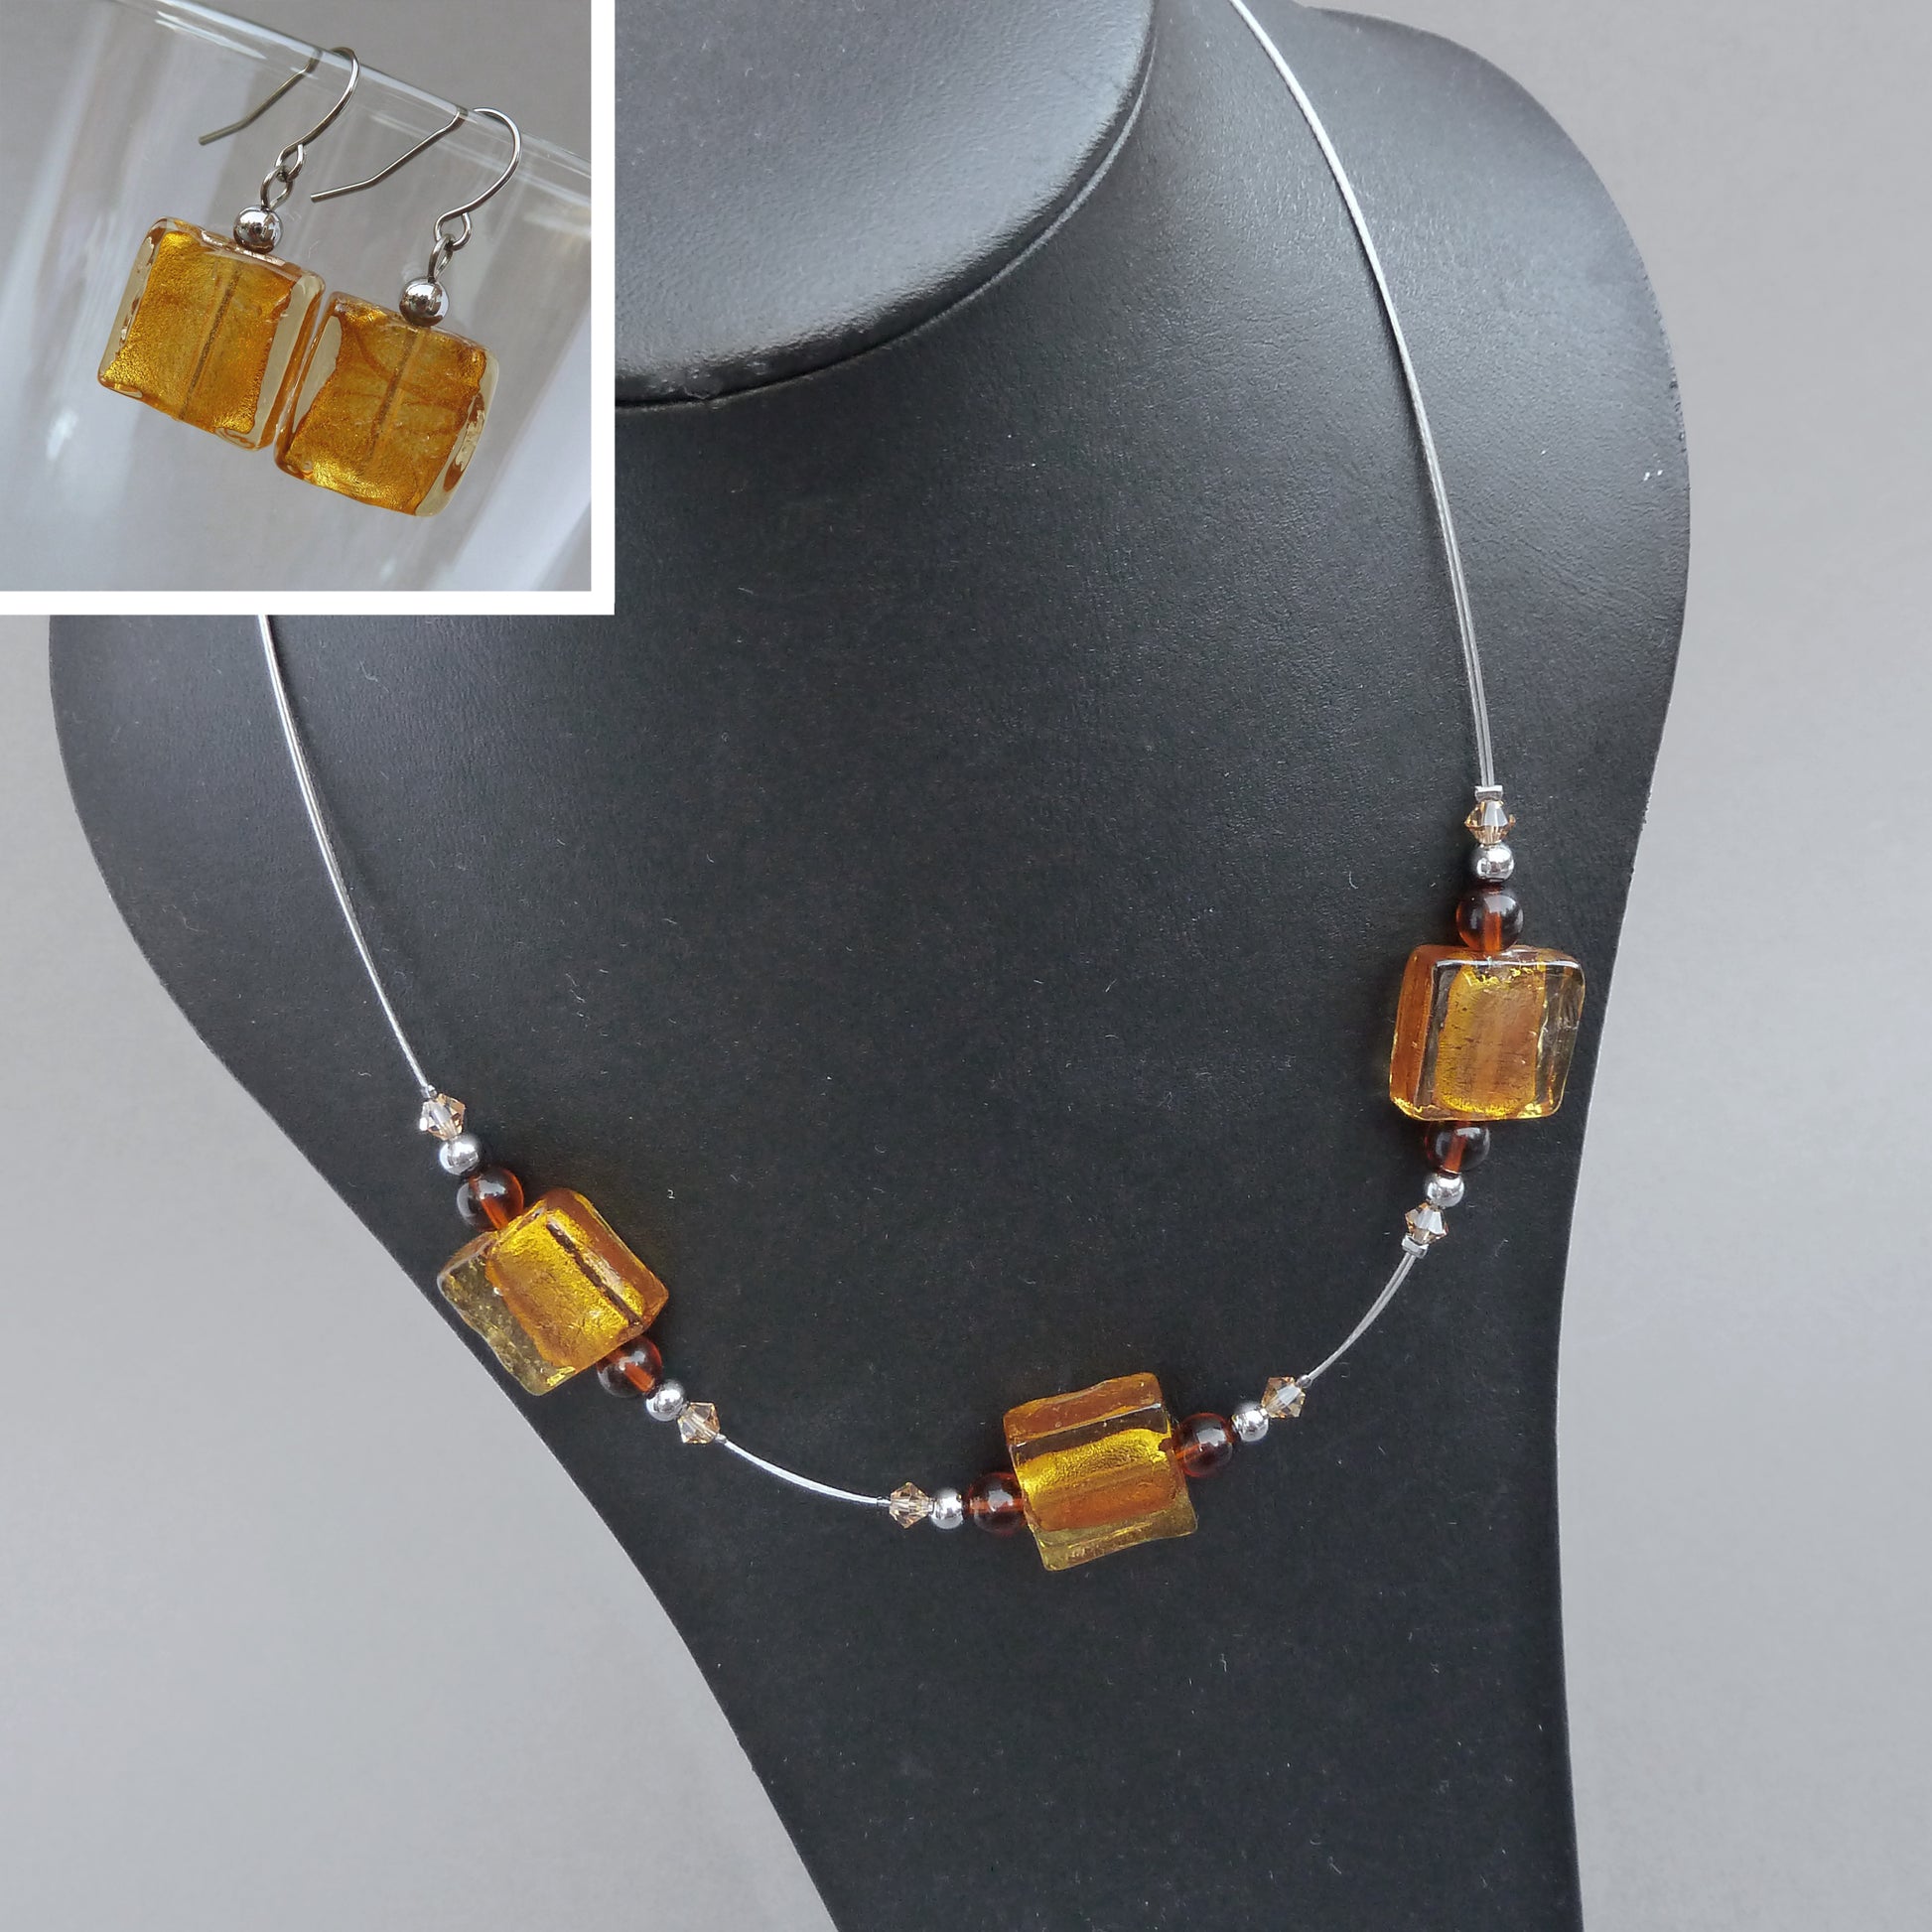 Amber fused glass necklace and earrings